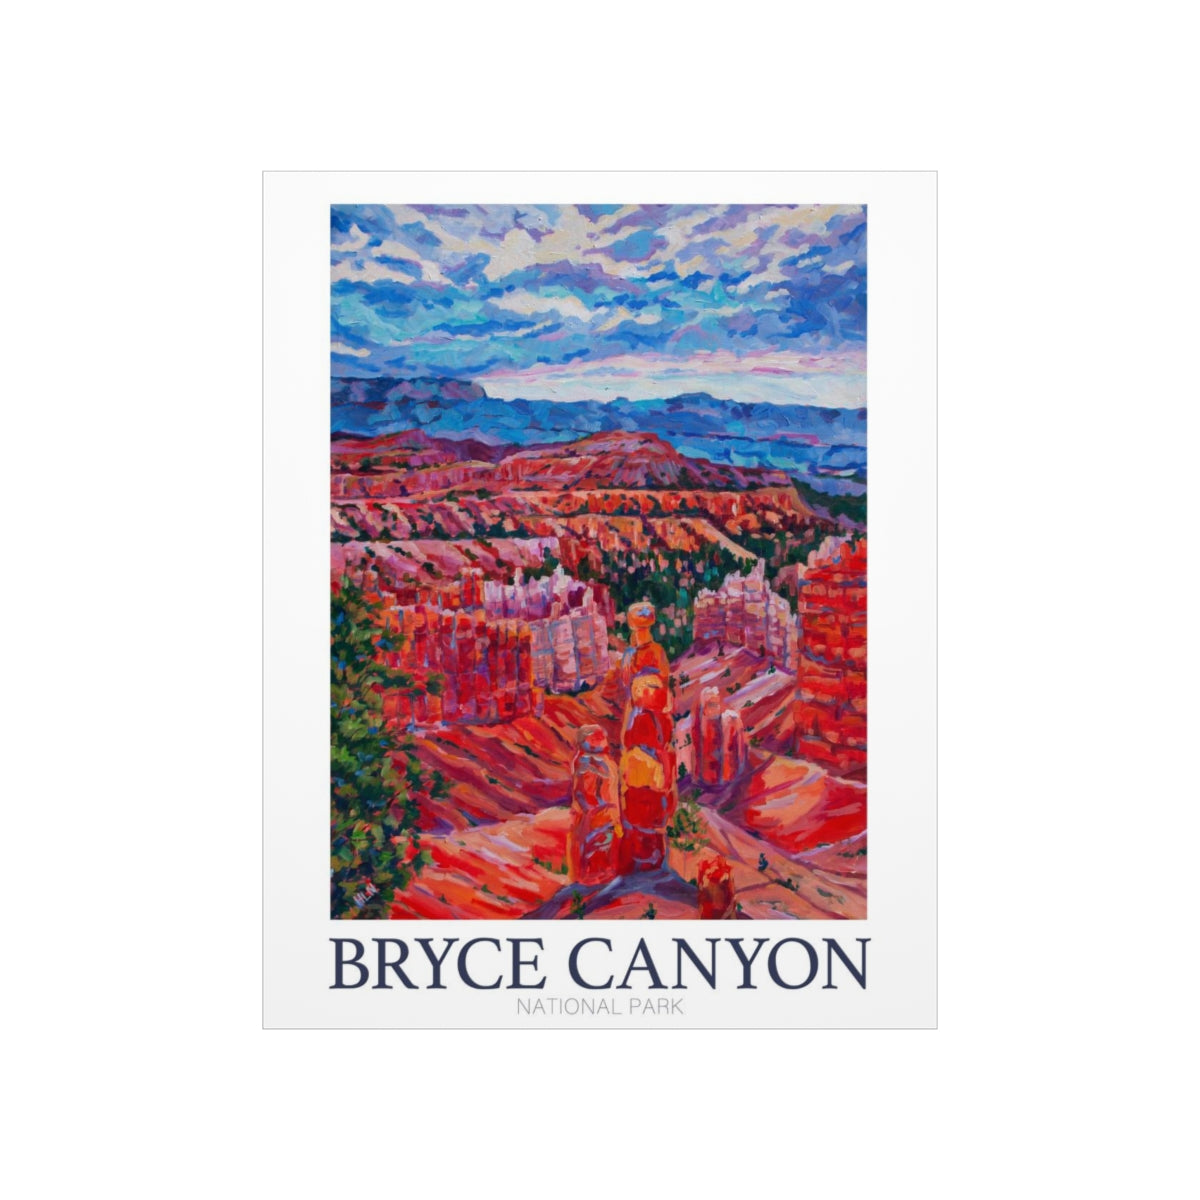 *Bryce Canyon National Park  Matte Vertical Poster